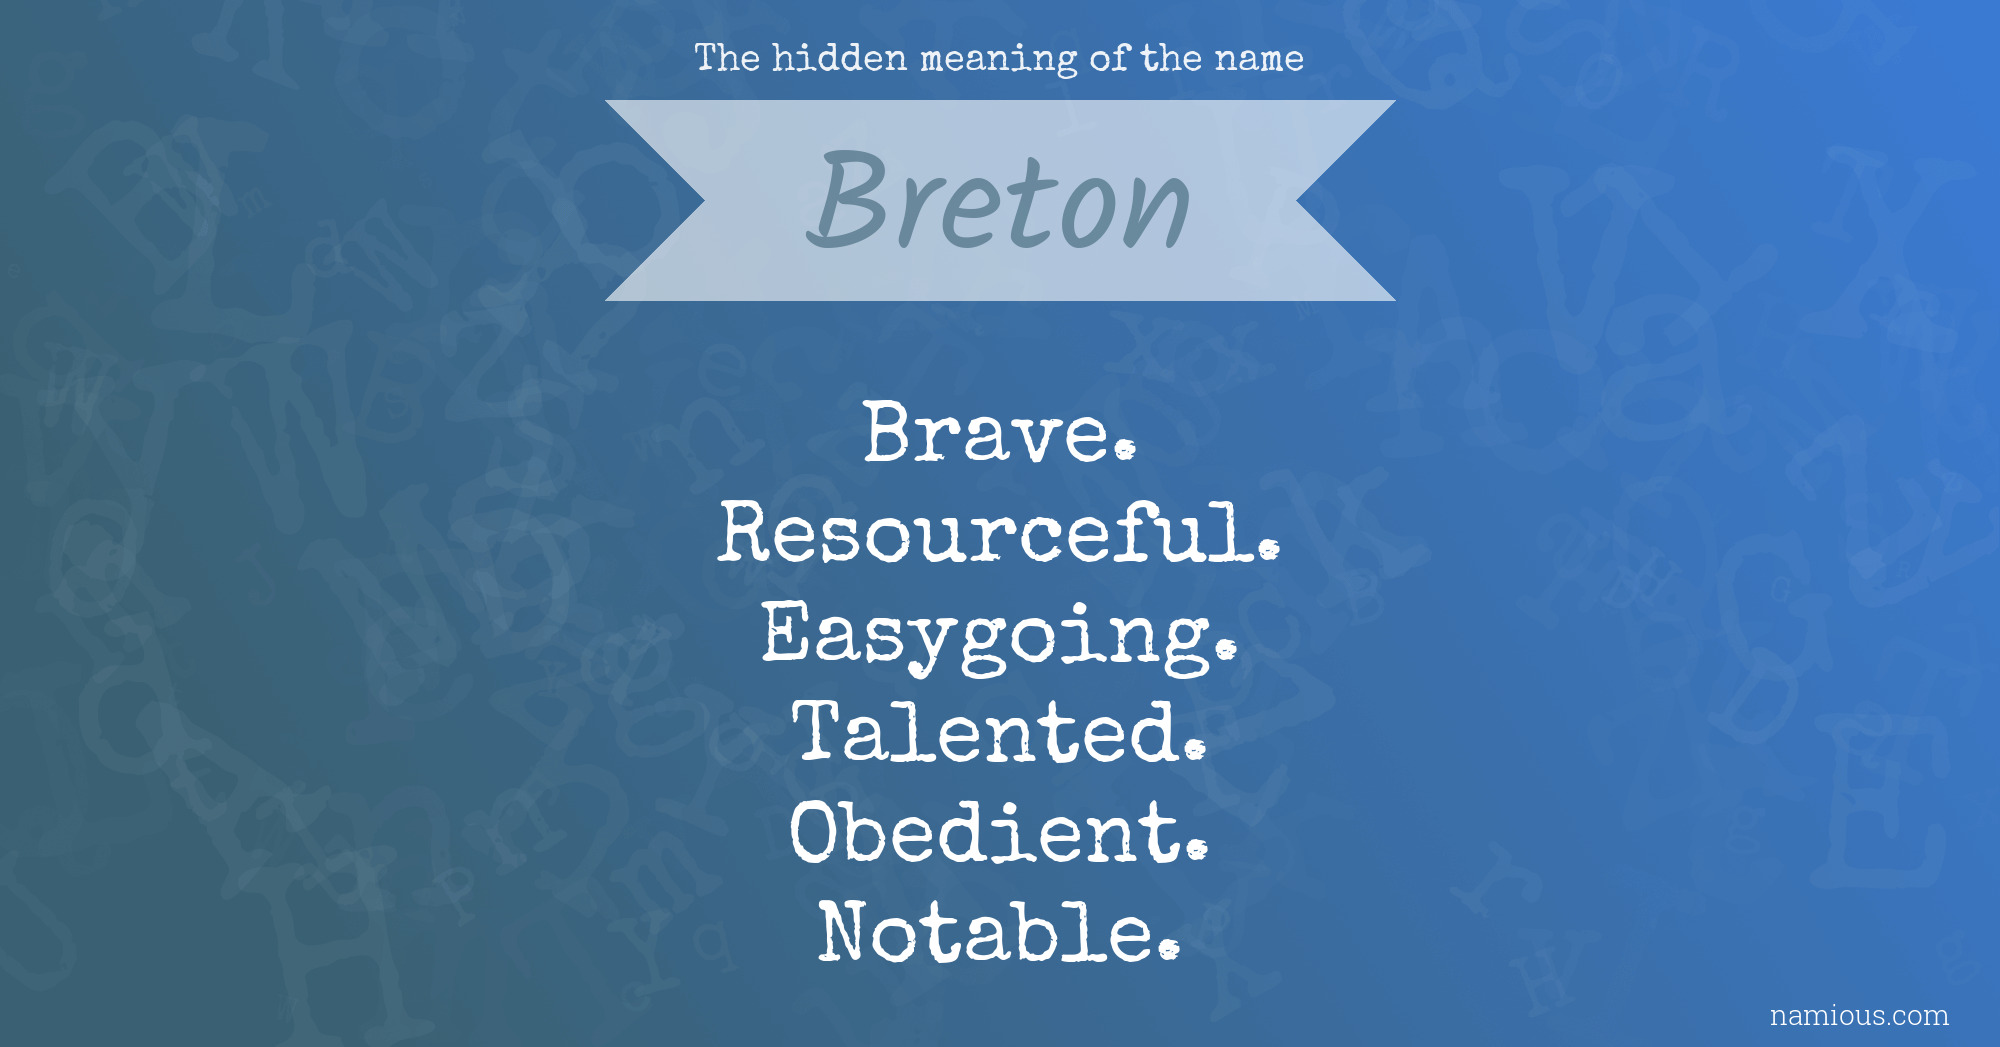 The hidden meaning of the name Breton